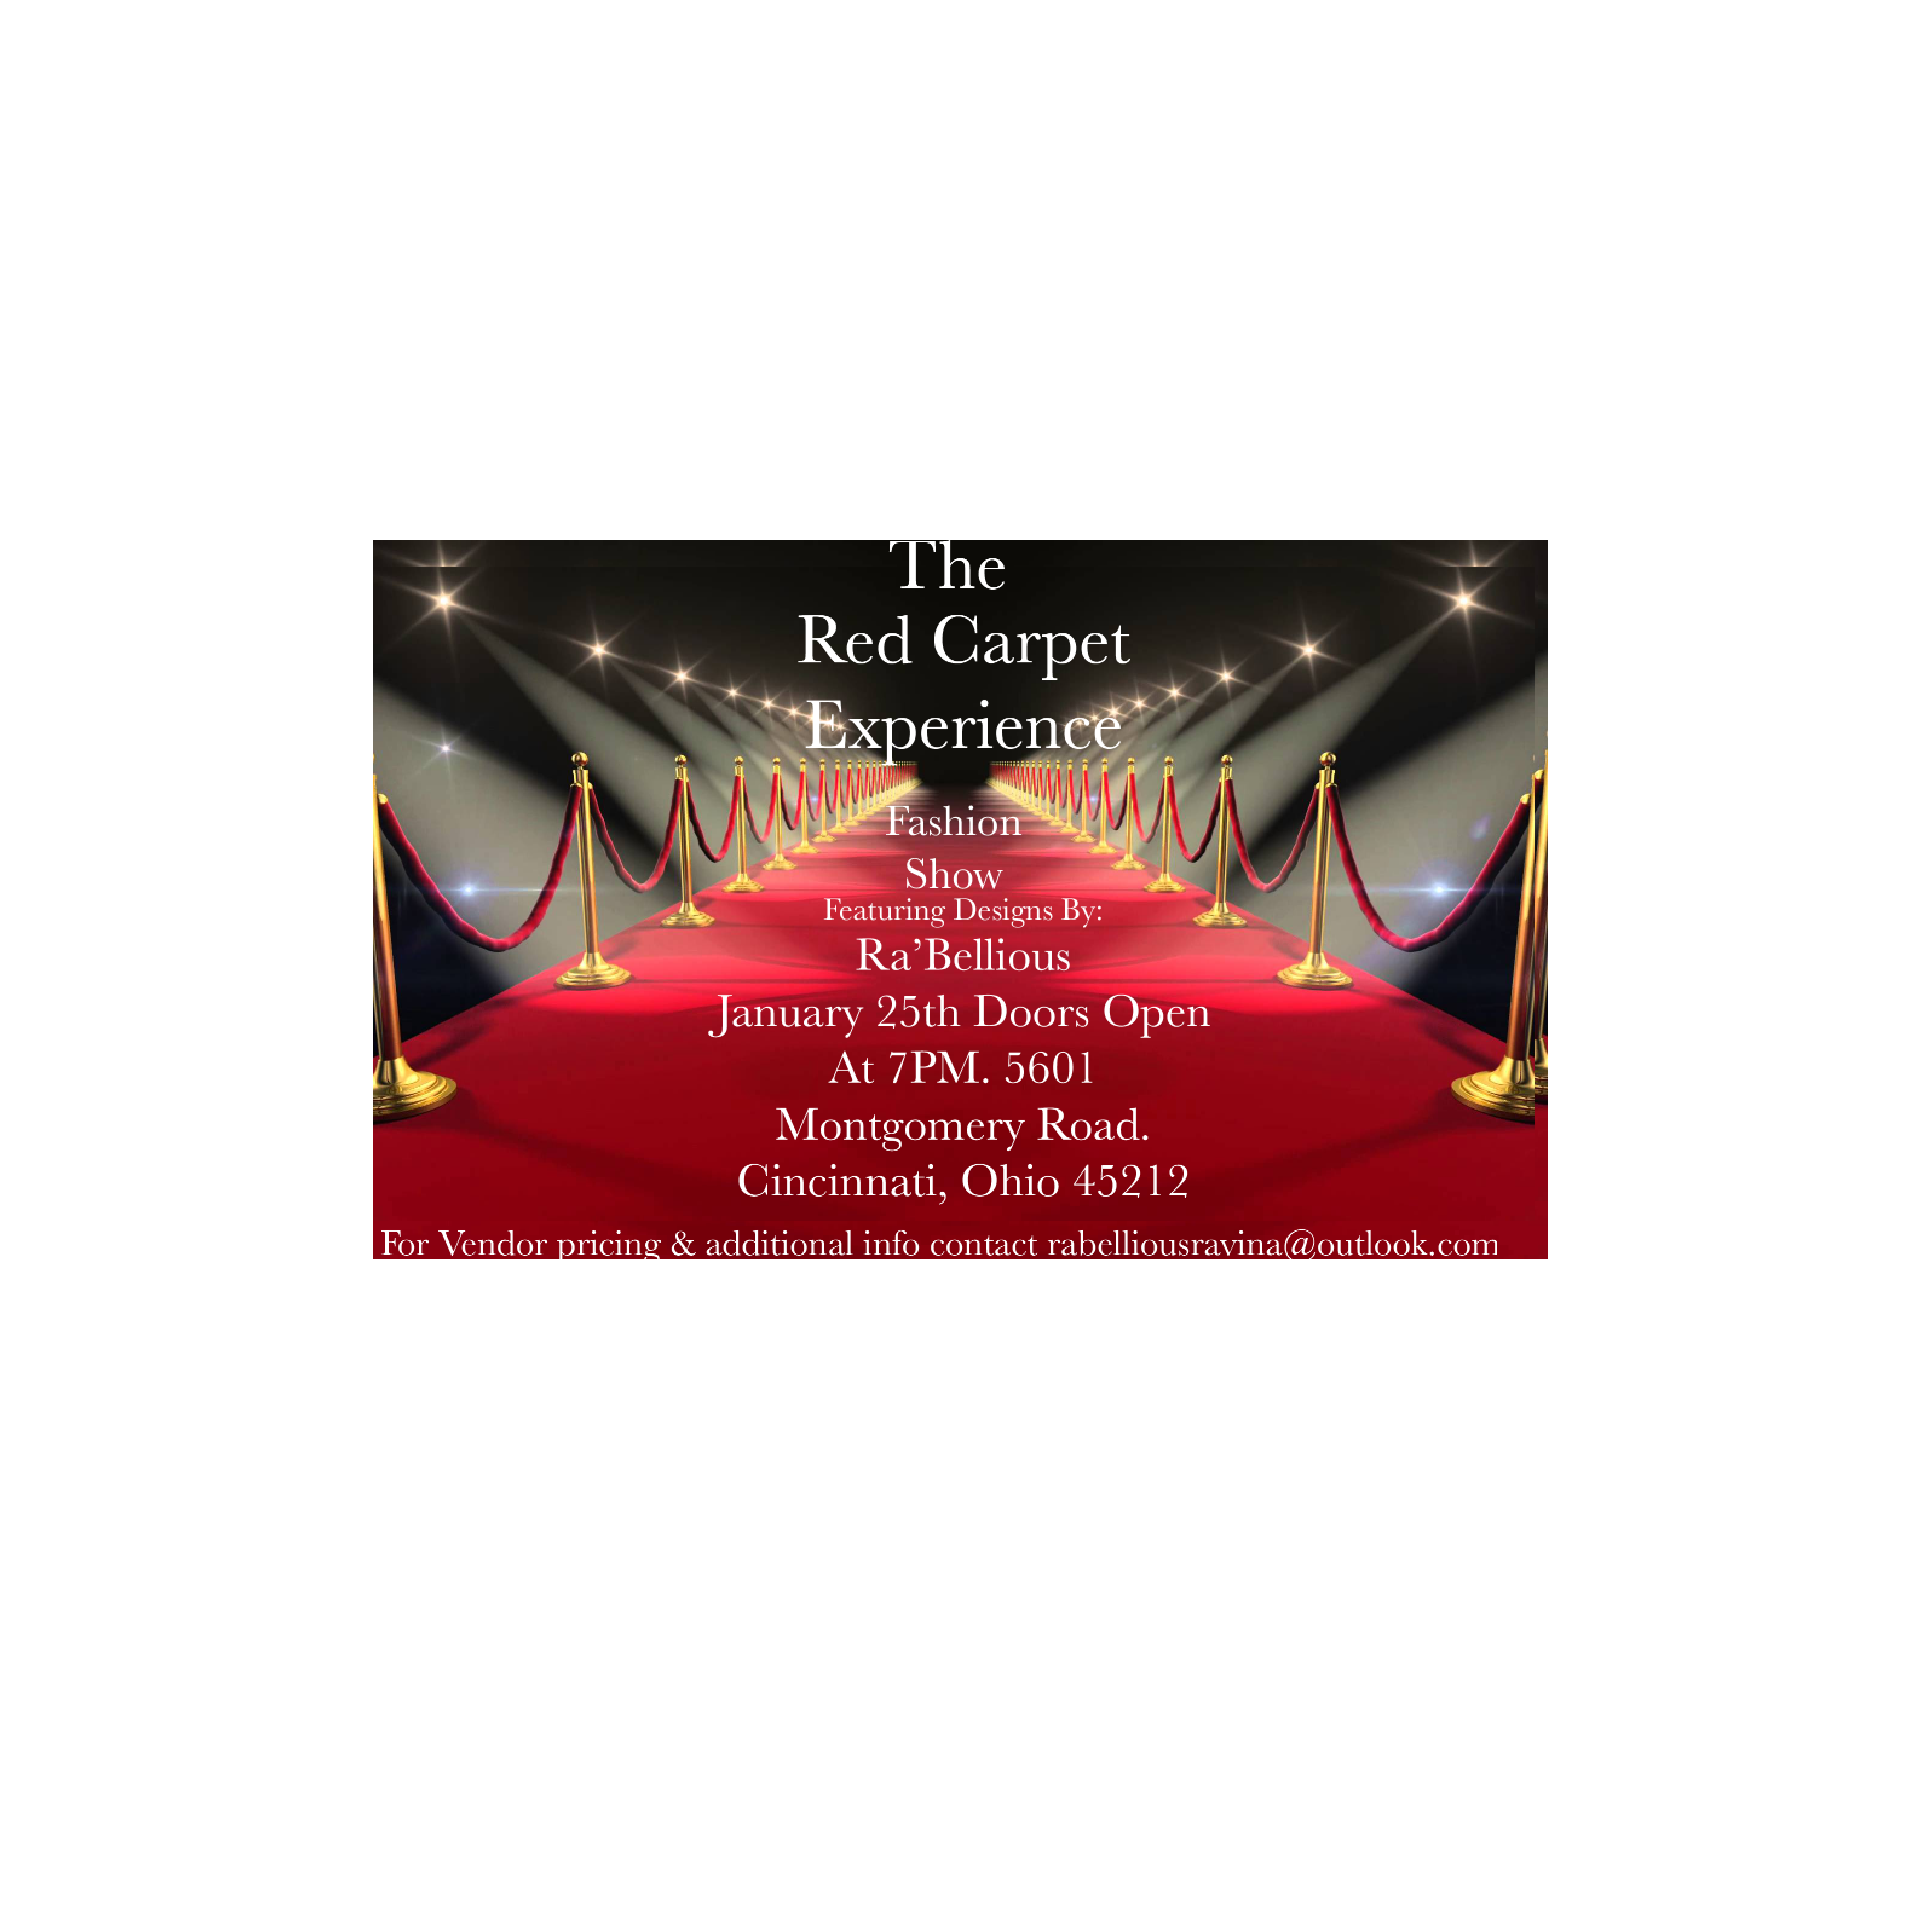 The Red Carpet Experience